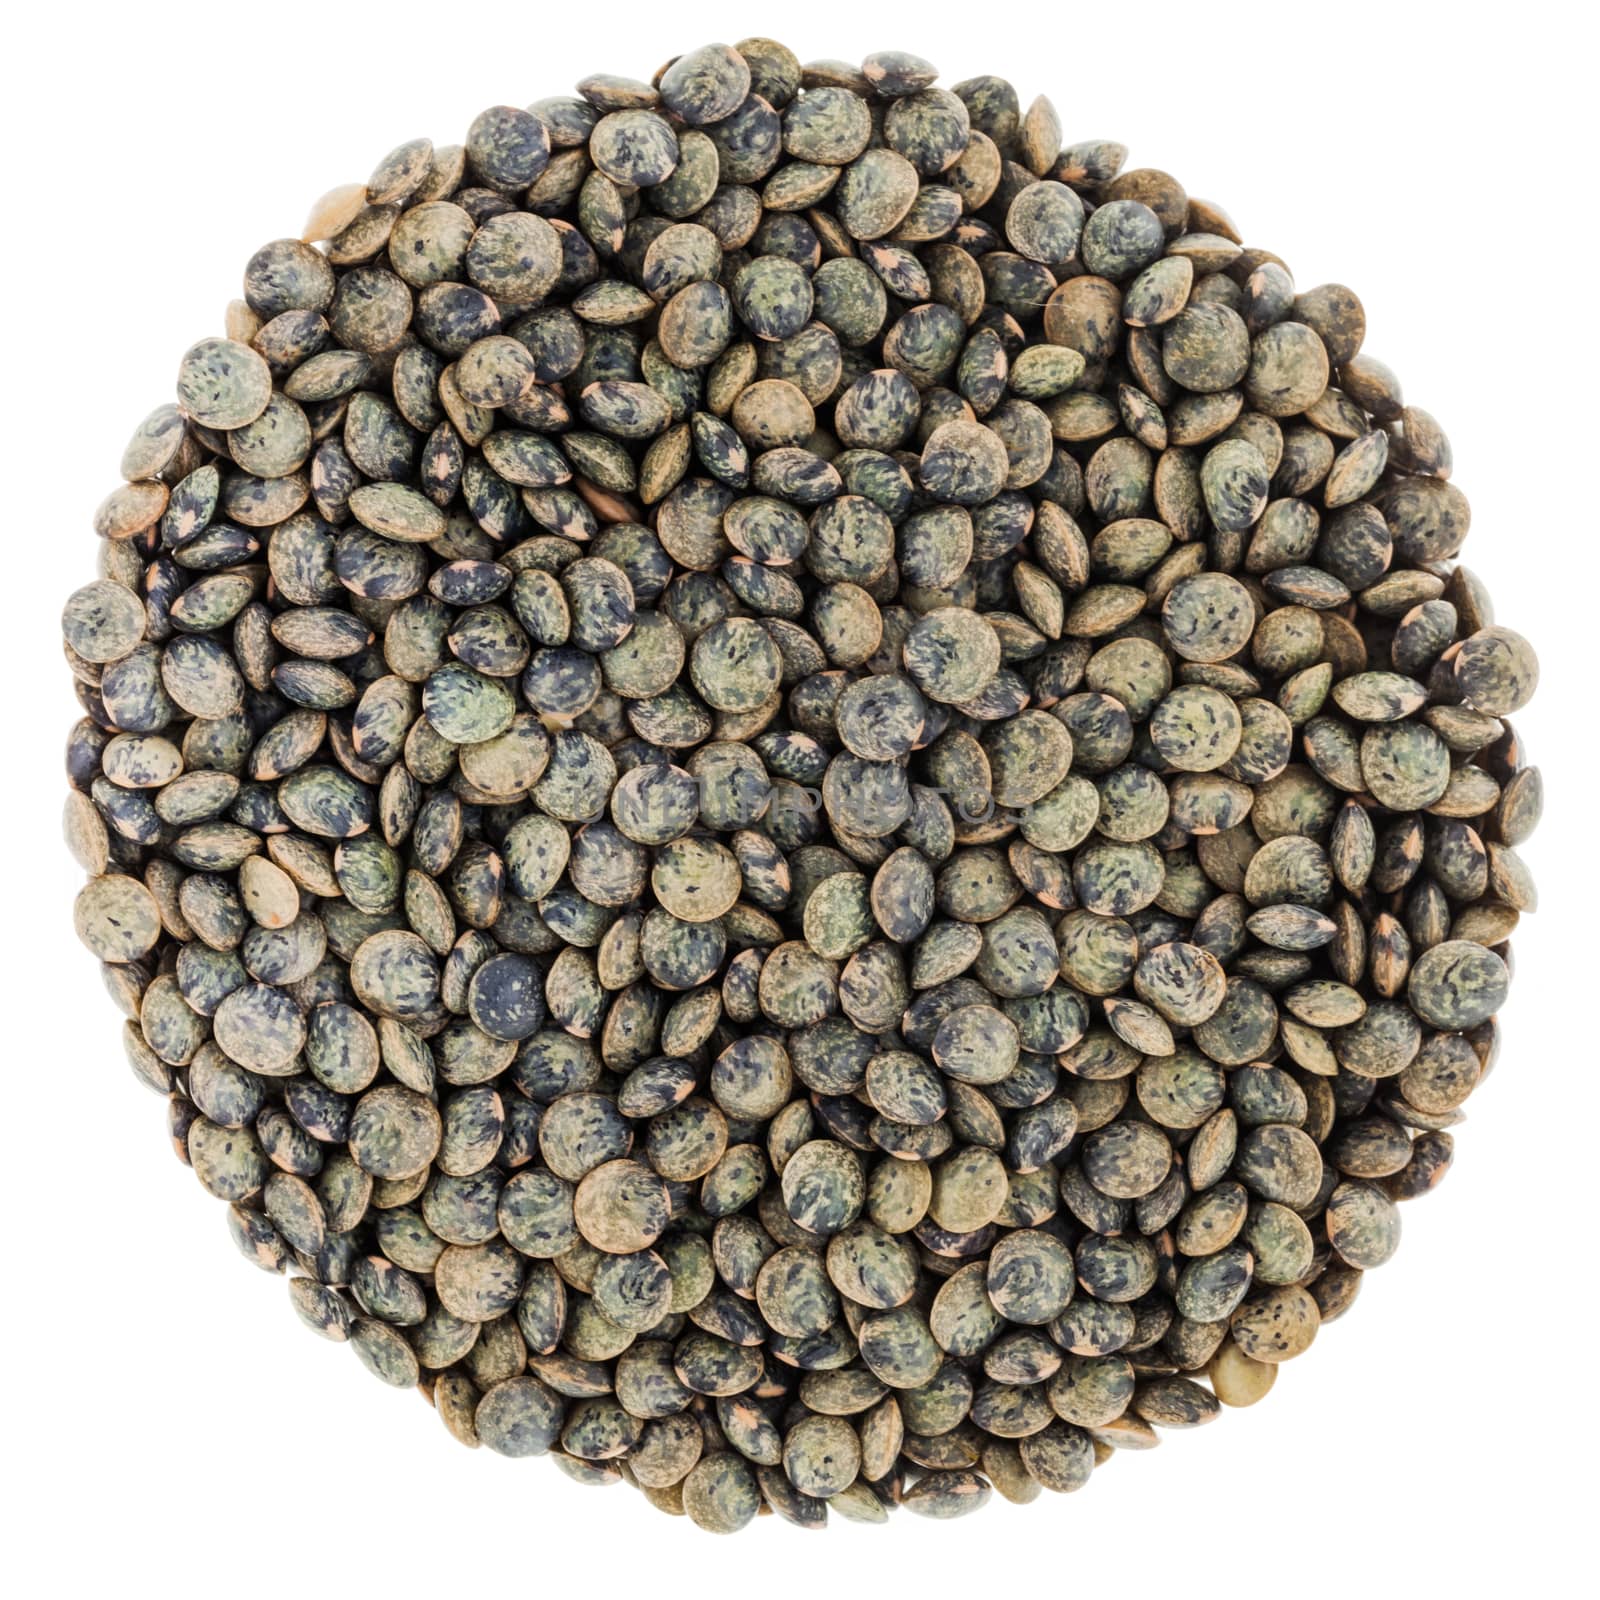 Perfect Circle of French Green Lentils Isolated on White Background